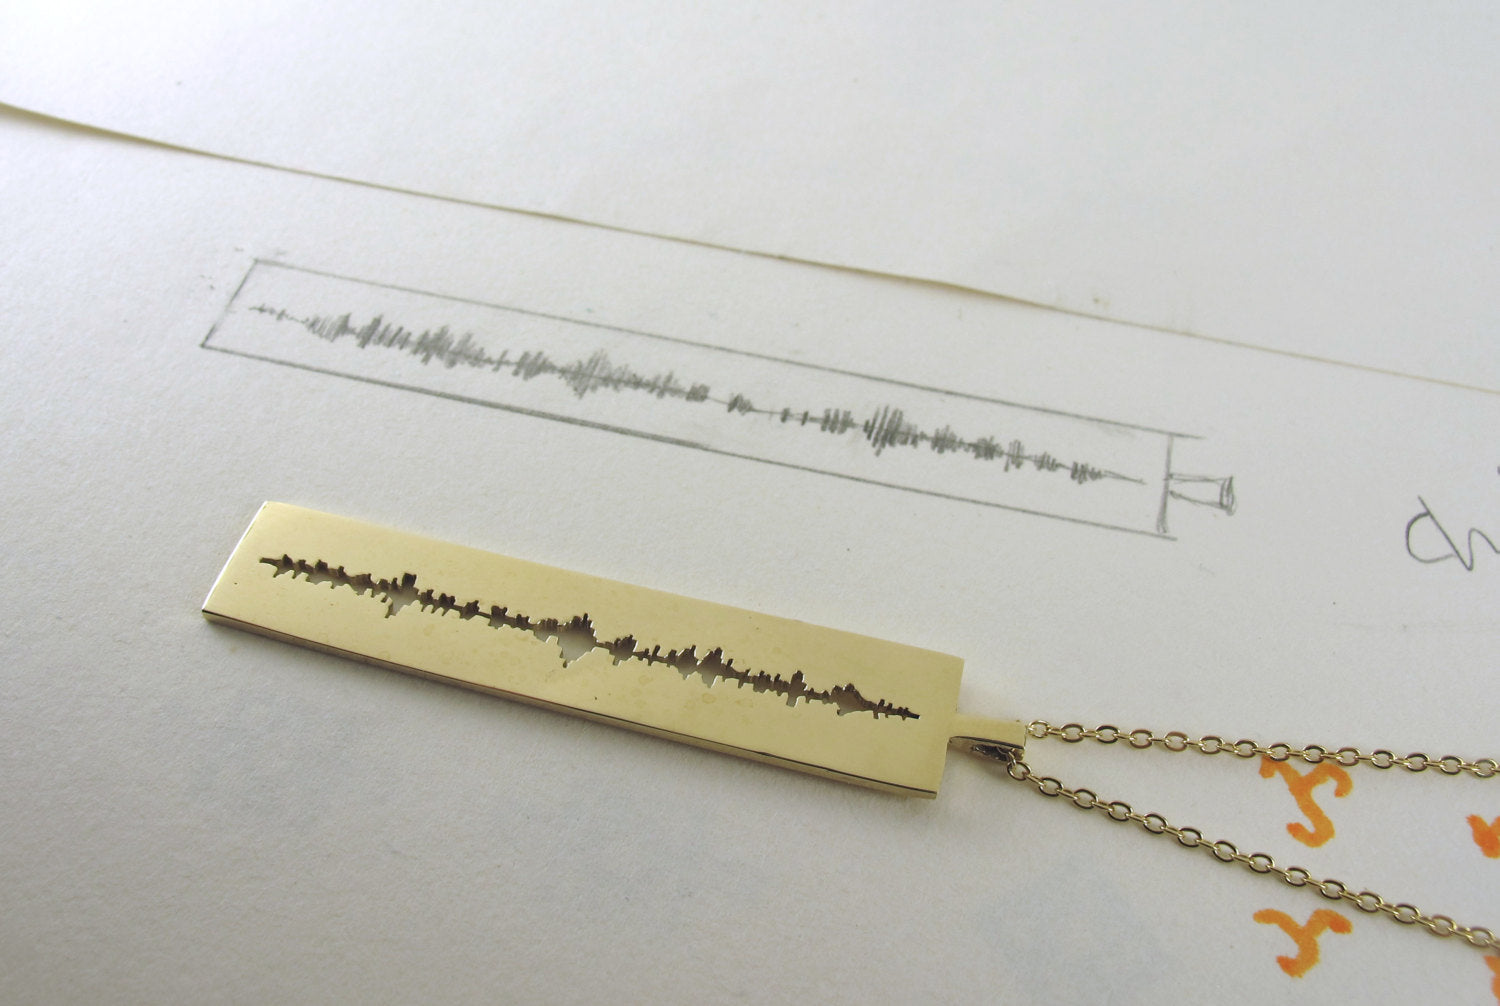 Sounds of Love - Personalized Soundwave Necklace Cut Out Design for Geekery Nerd Music Jewelry, Geek Chic, Hand Carved, Unique Valentine 178